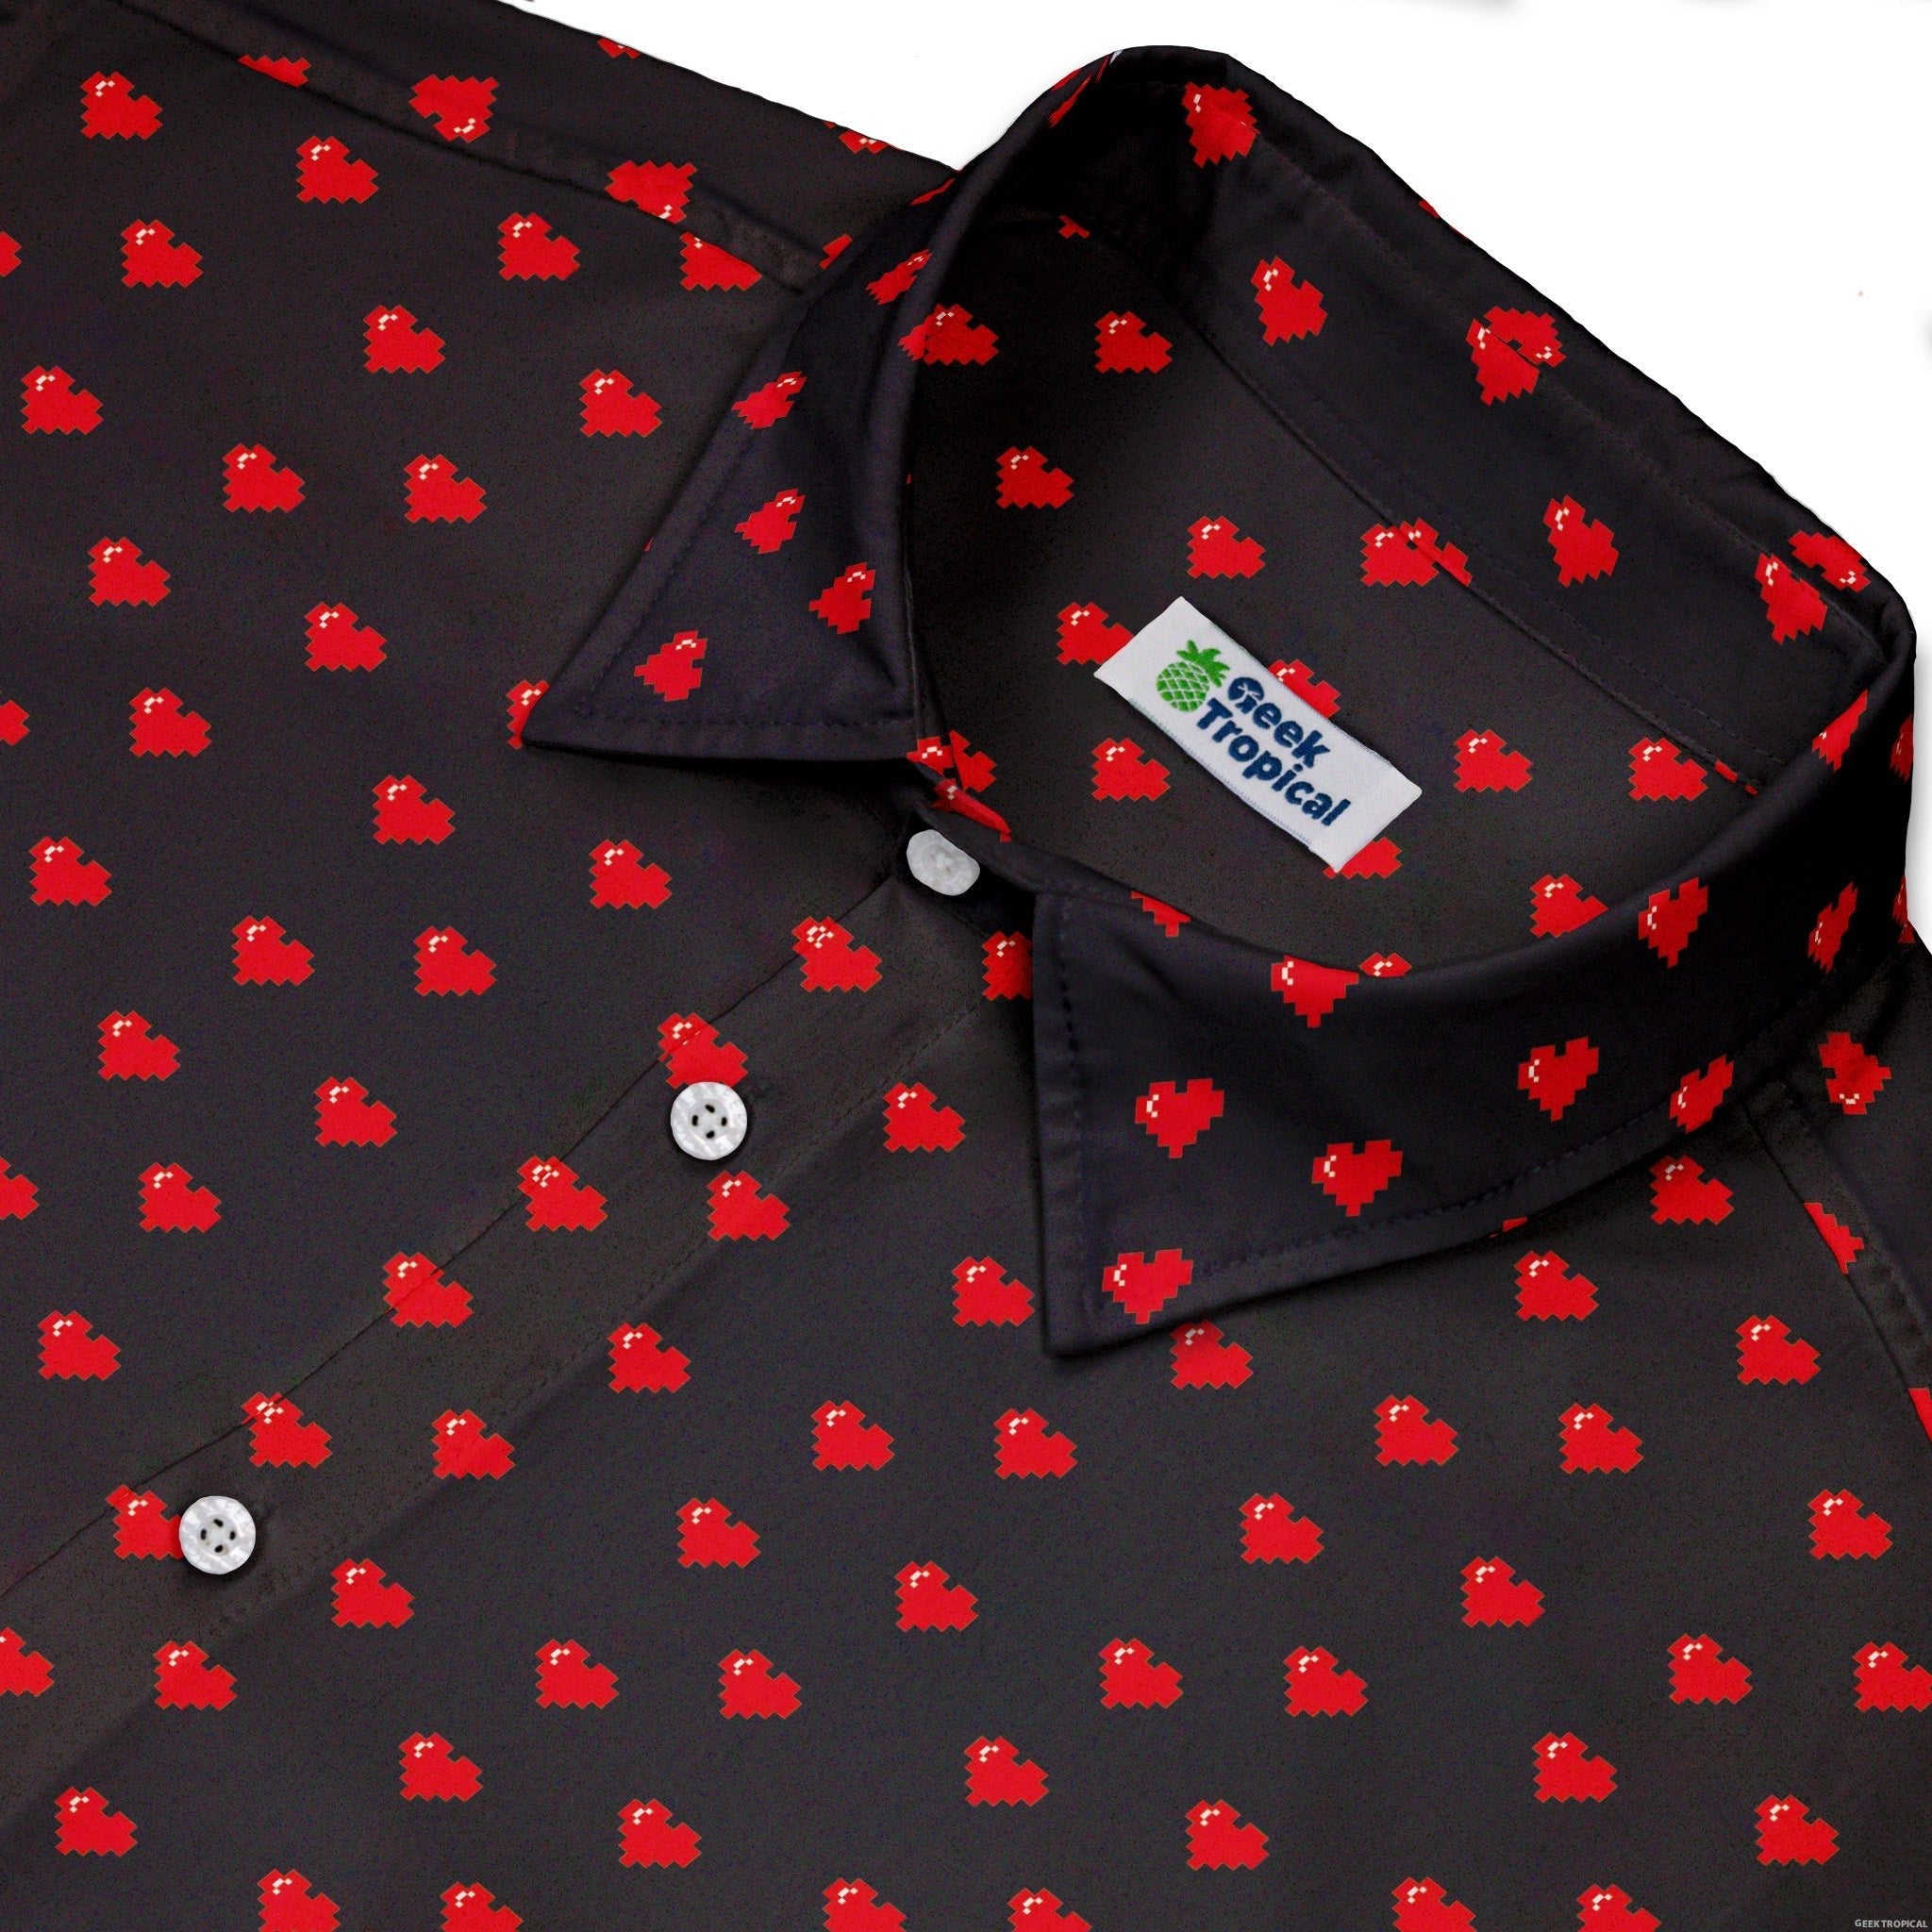 Video Game Hearts Black Button Up Shirt - adult sizing - Design by Heather Davenport - Simple Patterns